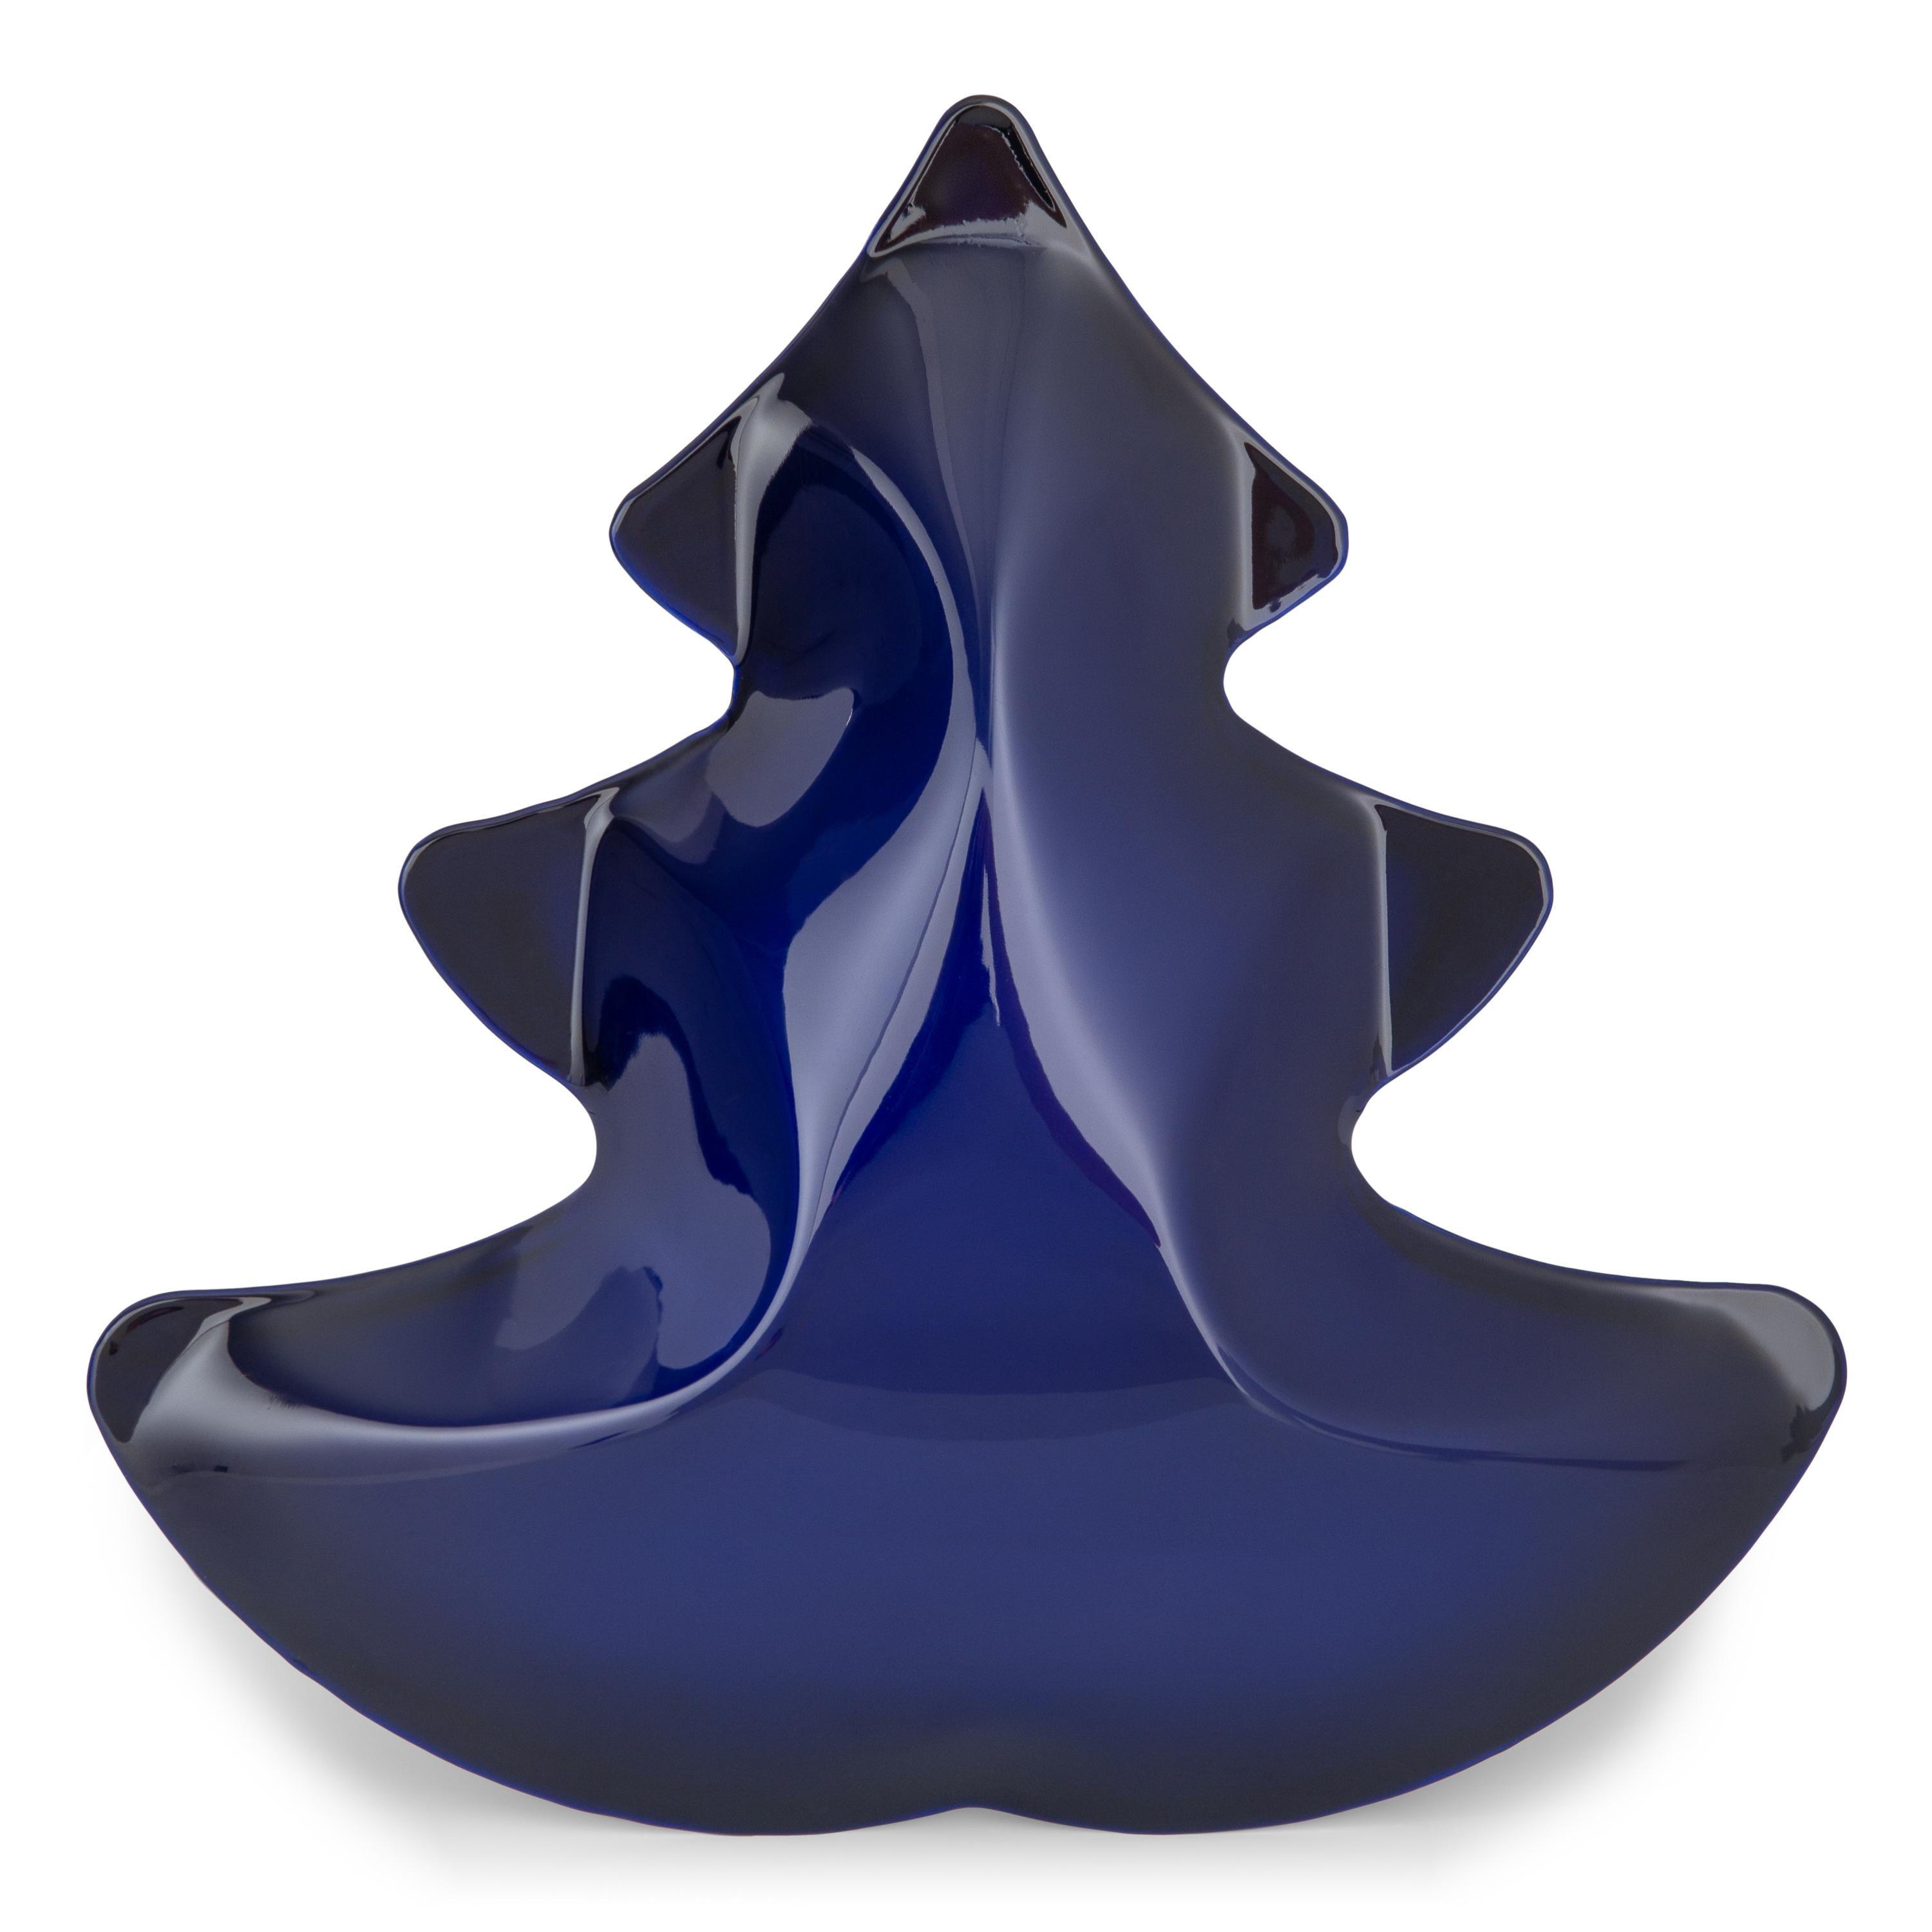 Blue small christmas tree by Zieta
Dimensions: H 23 x W 23 x D 6 cm.
Materials: Blue carbon steel.

Different sizes (large) and colors available (blue, red, INOX). Please contact us.

Following “less is more” motto, our CHOINKA glows even with